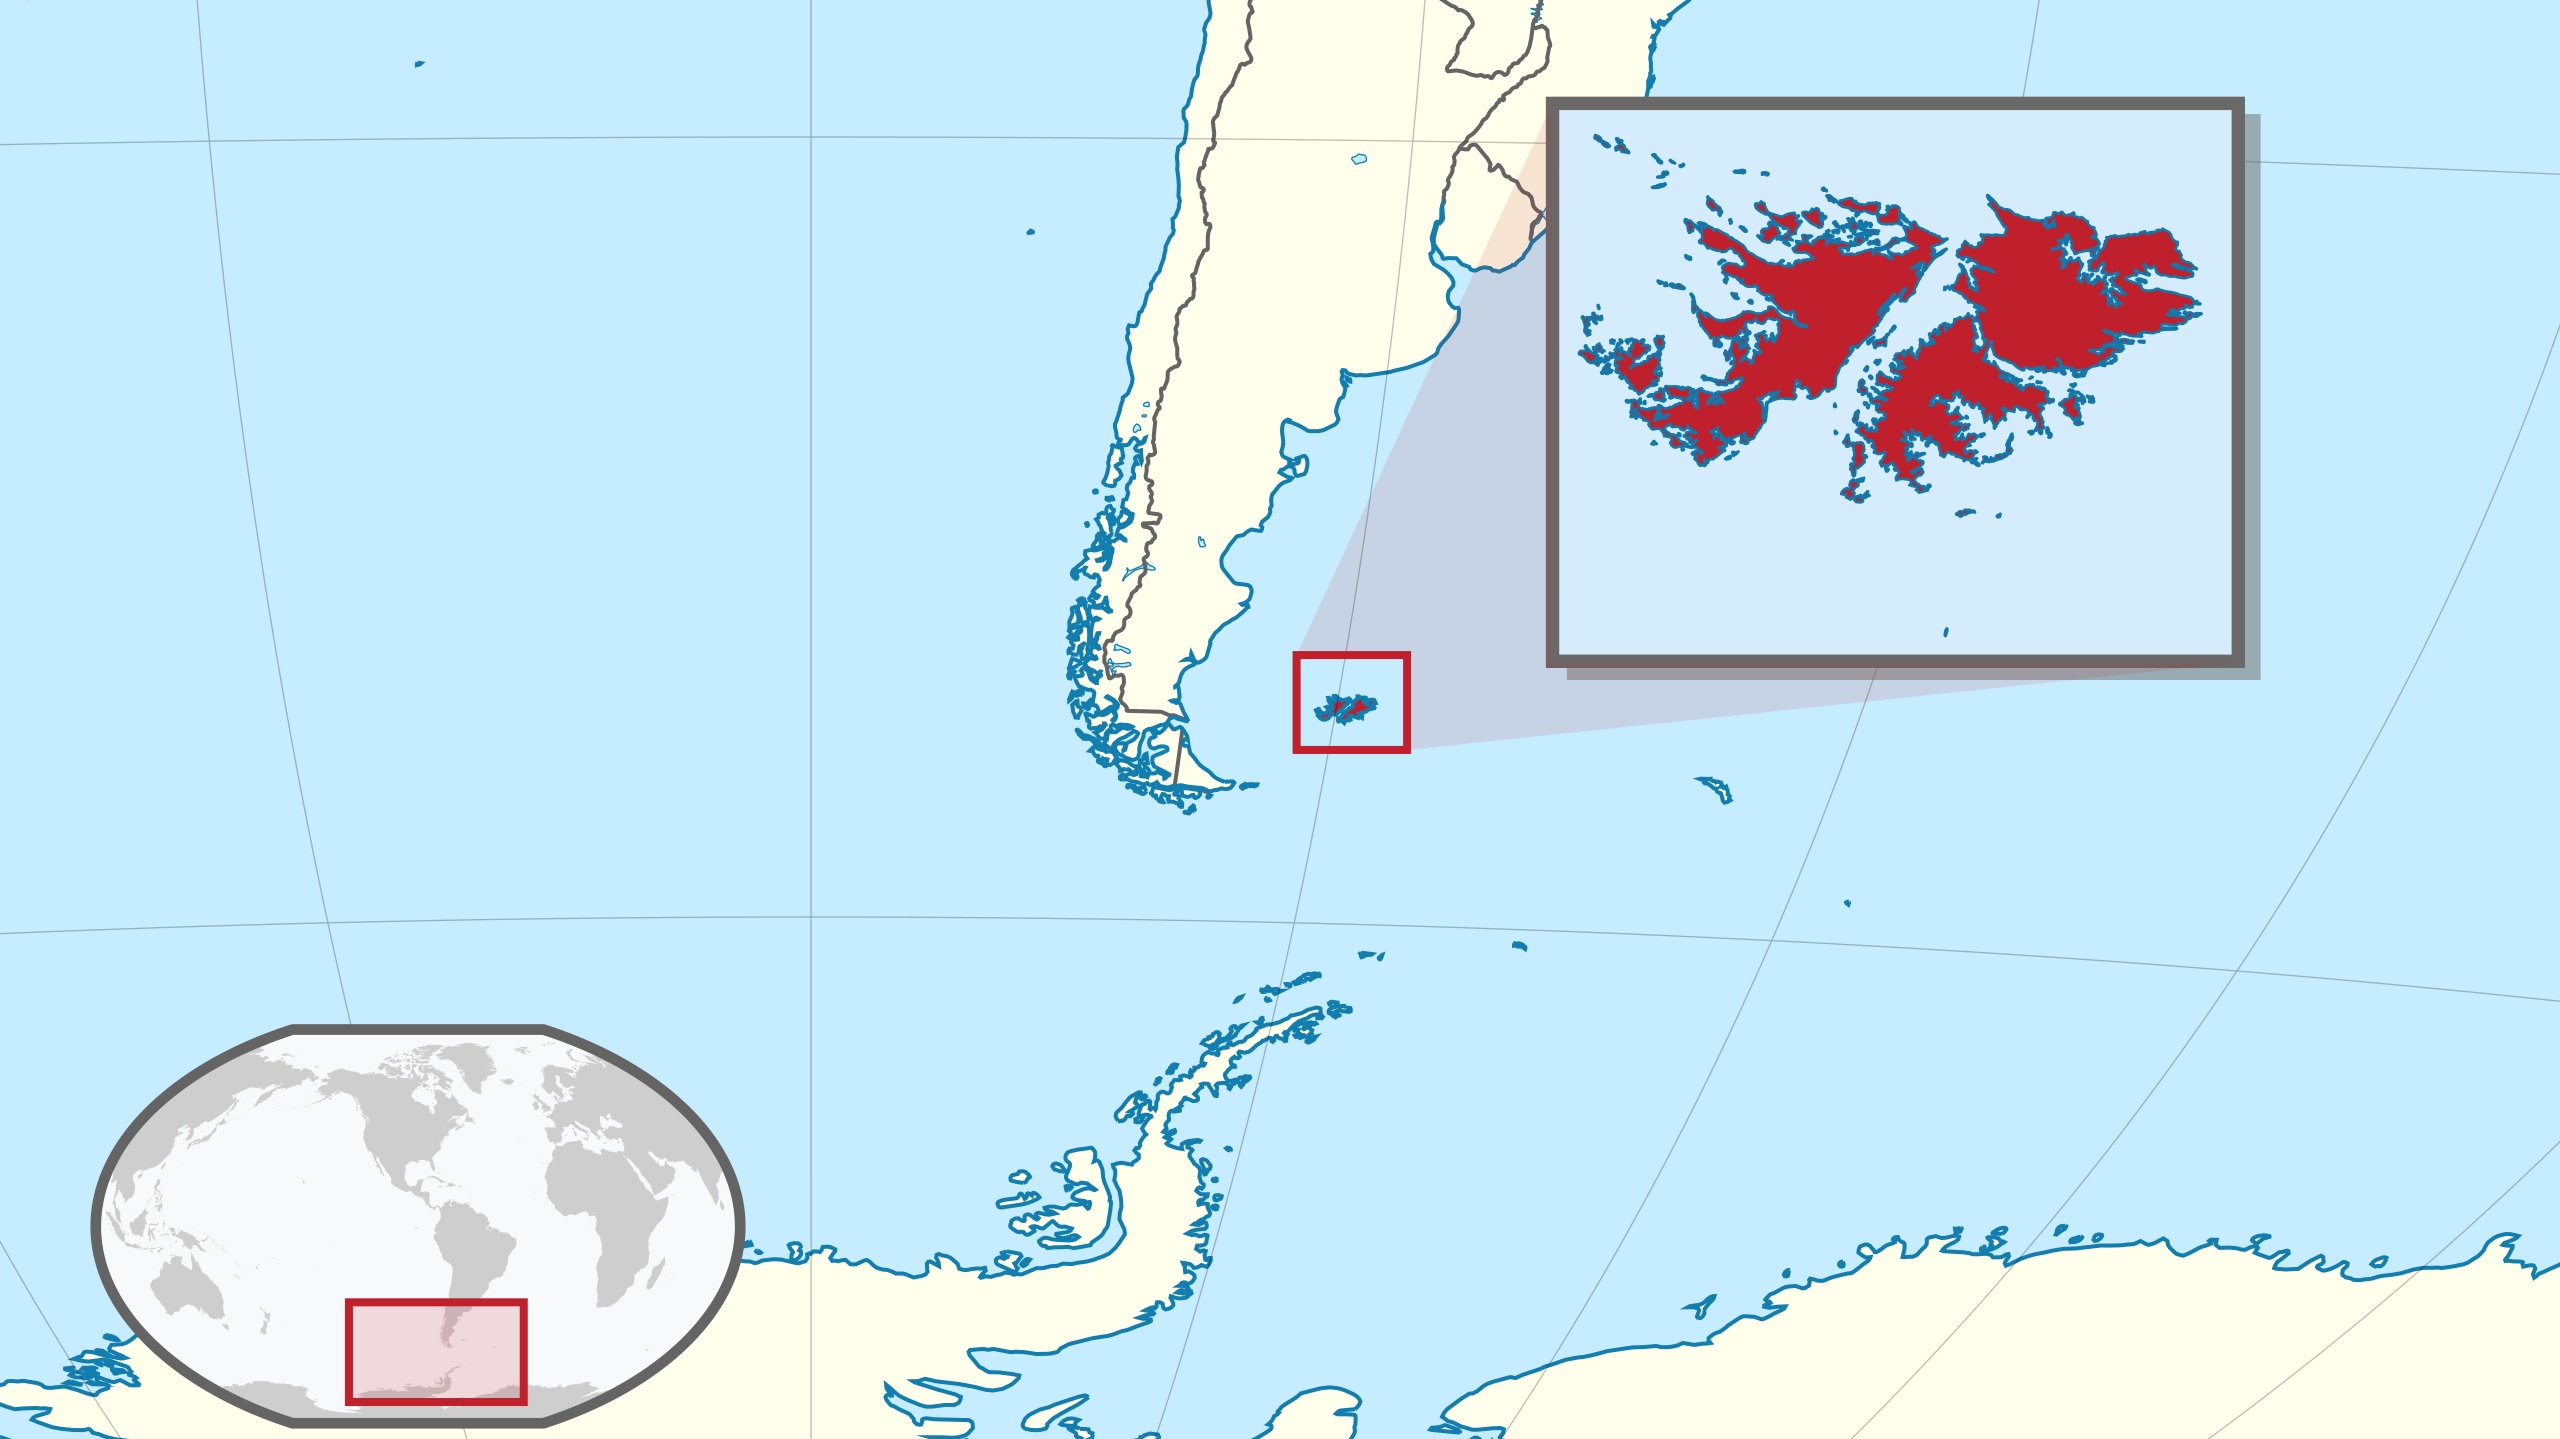 The conflict in the region began a little over 40 years ago, in April 1982, but the issue is already almost 190 years old, with the dispute for the territory's sovereignty, known in Argentina as the Malvinas Islands and in the United Kingdom as the Falklands Islands.